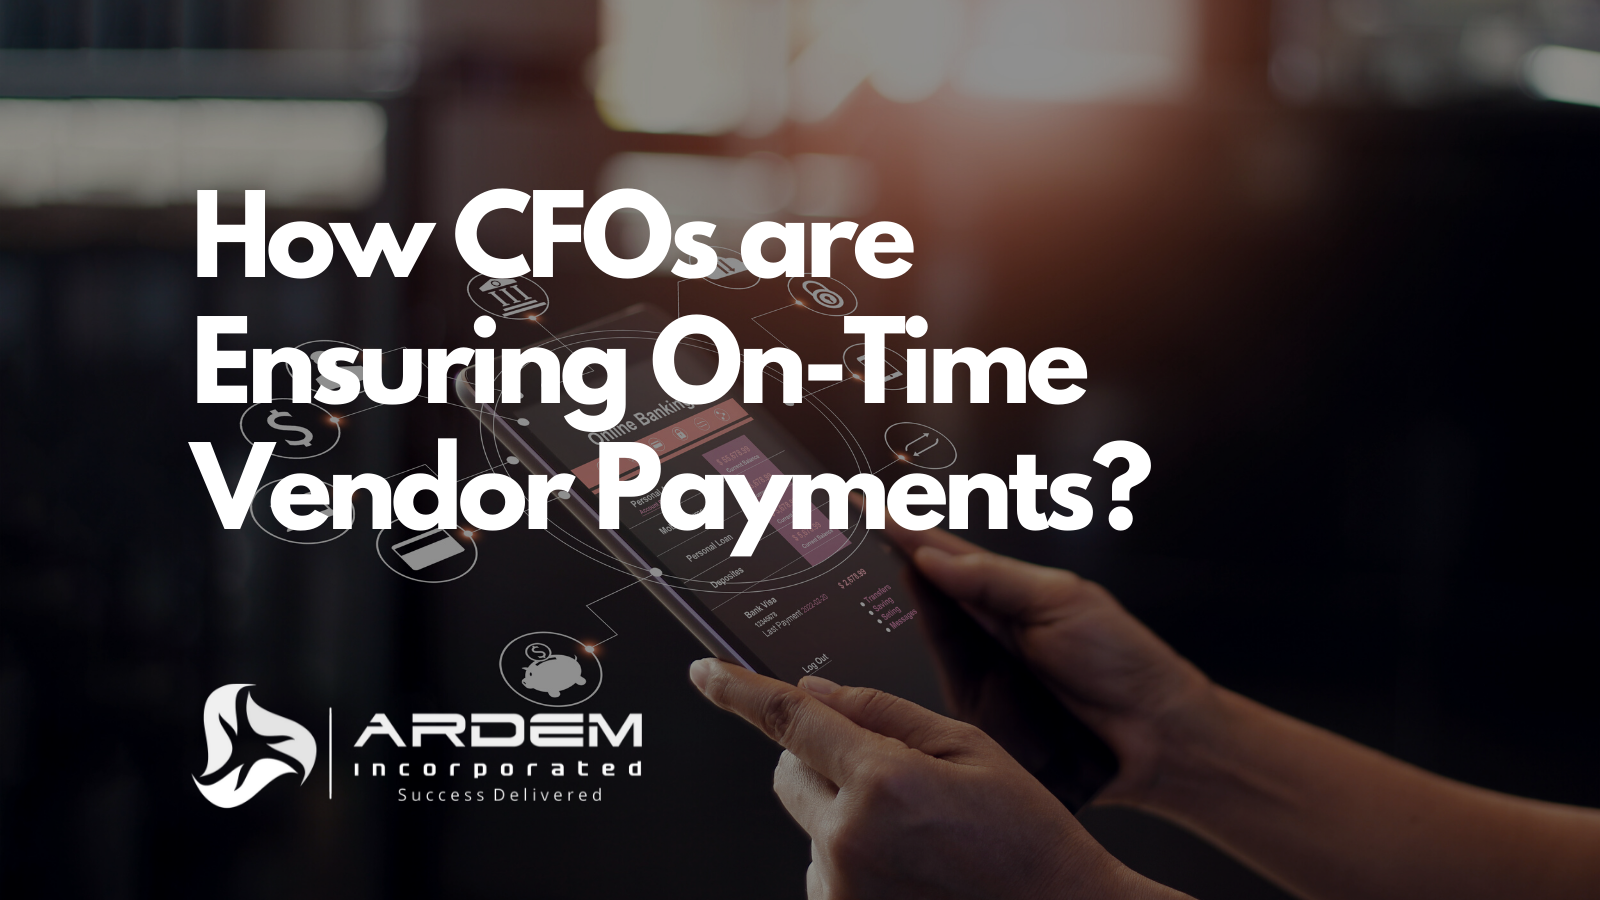 Vendor Payments on time by CFOs